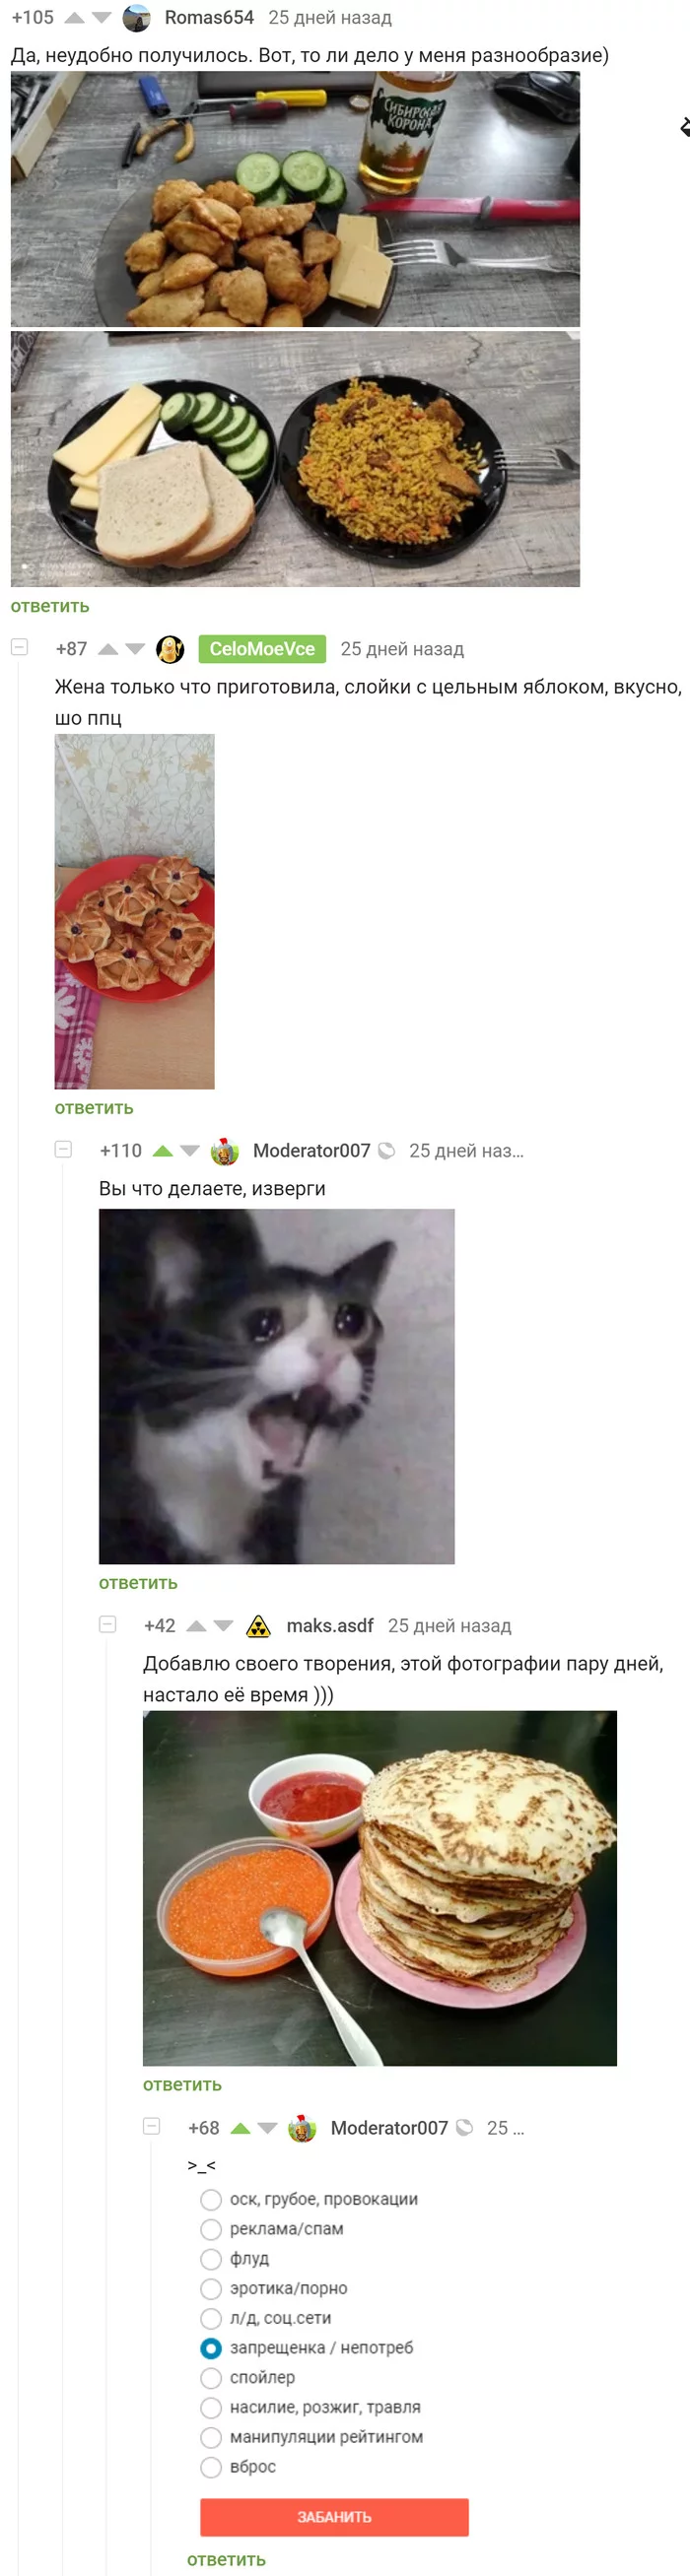 Don't tease hungry moderators - Screenshot, Comments on Peekaboo, Food, Pancakes, Yummy, Yummy, Hunger, Ban, , Moderator, Humor, Comments, Pick-up headphones, Longpost